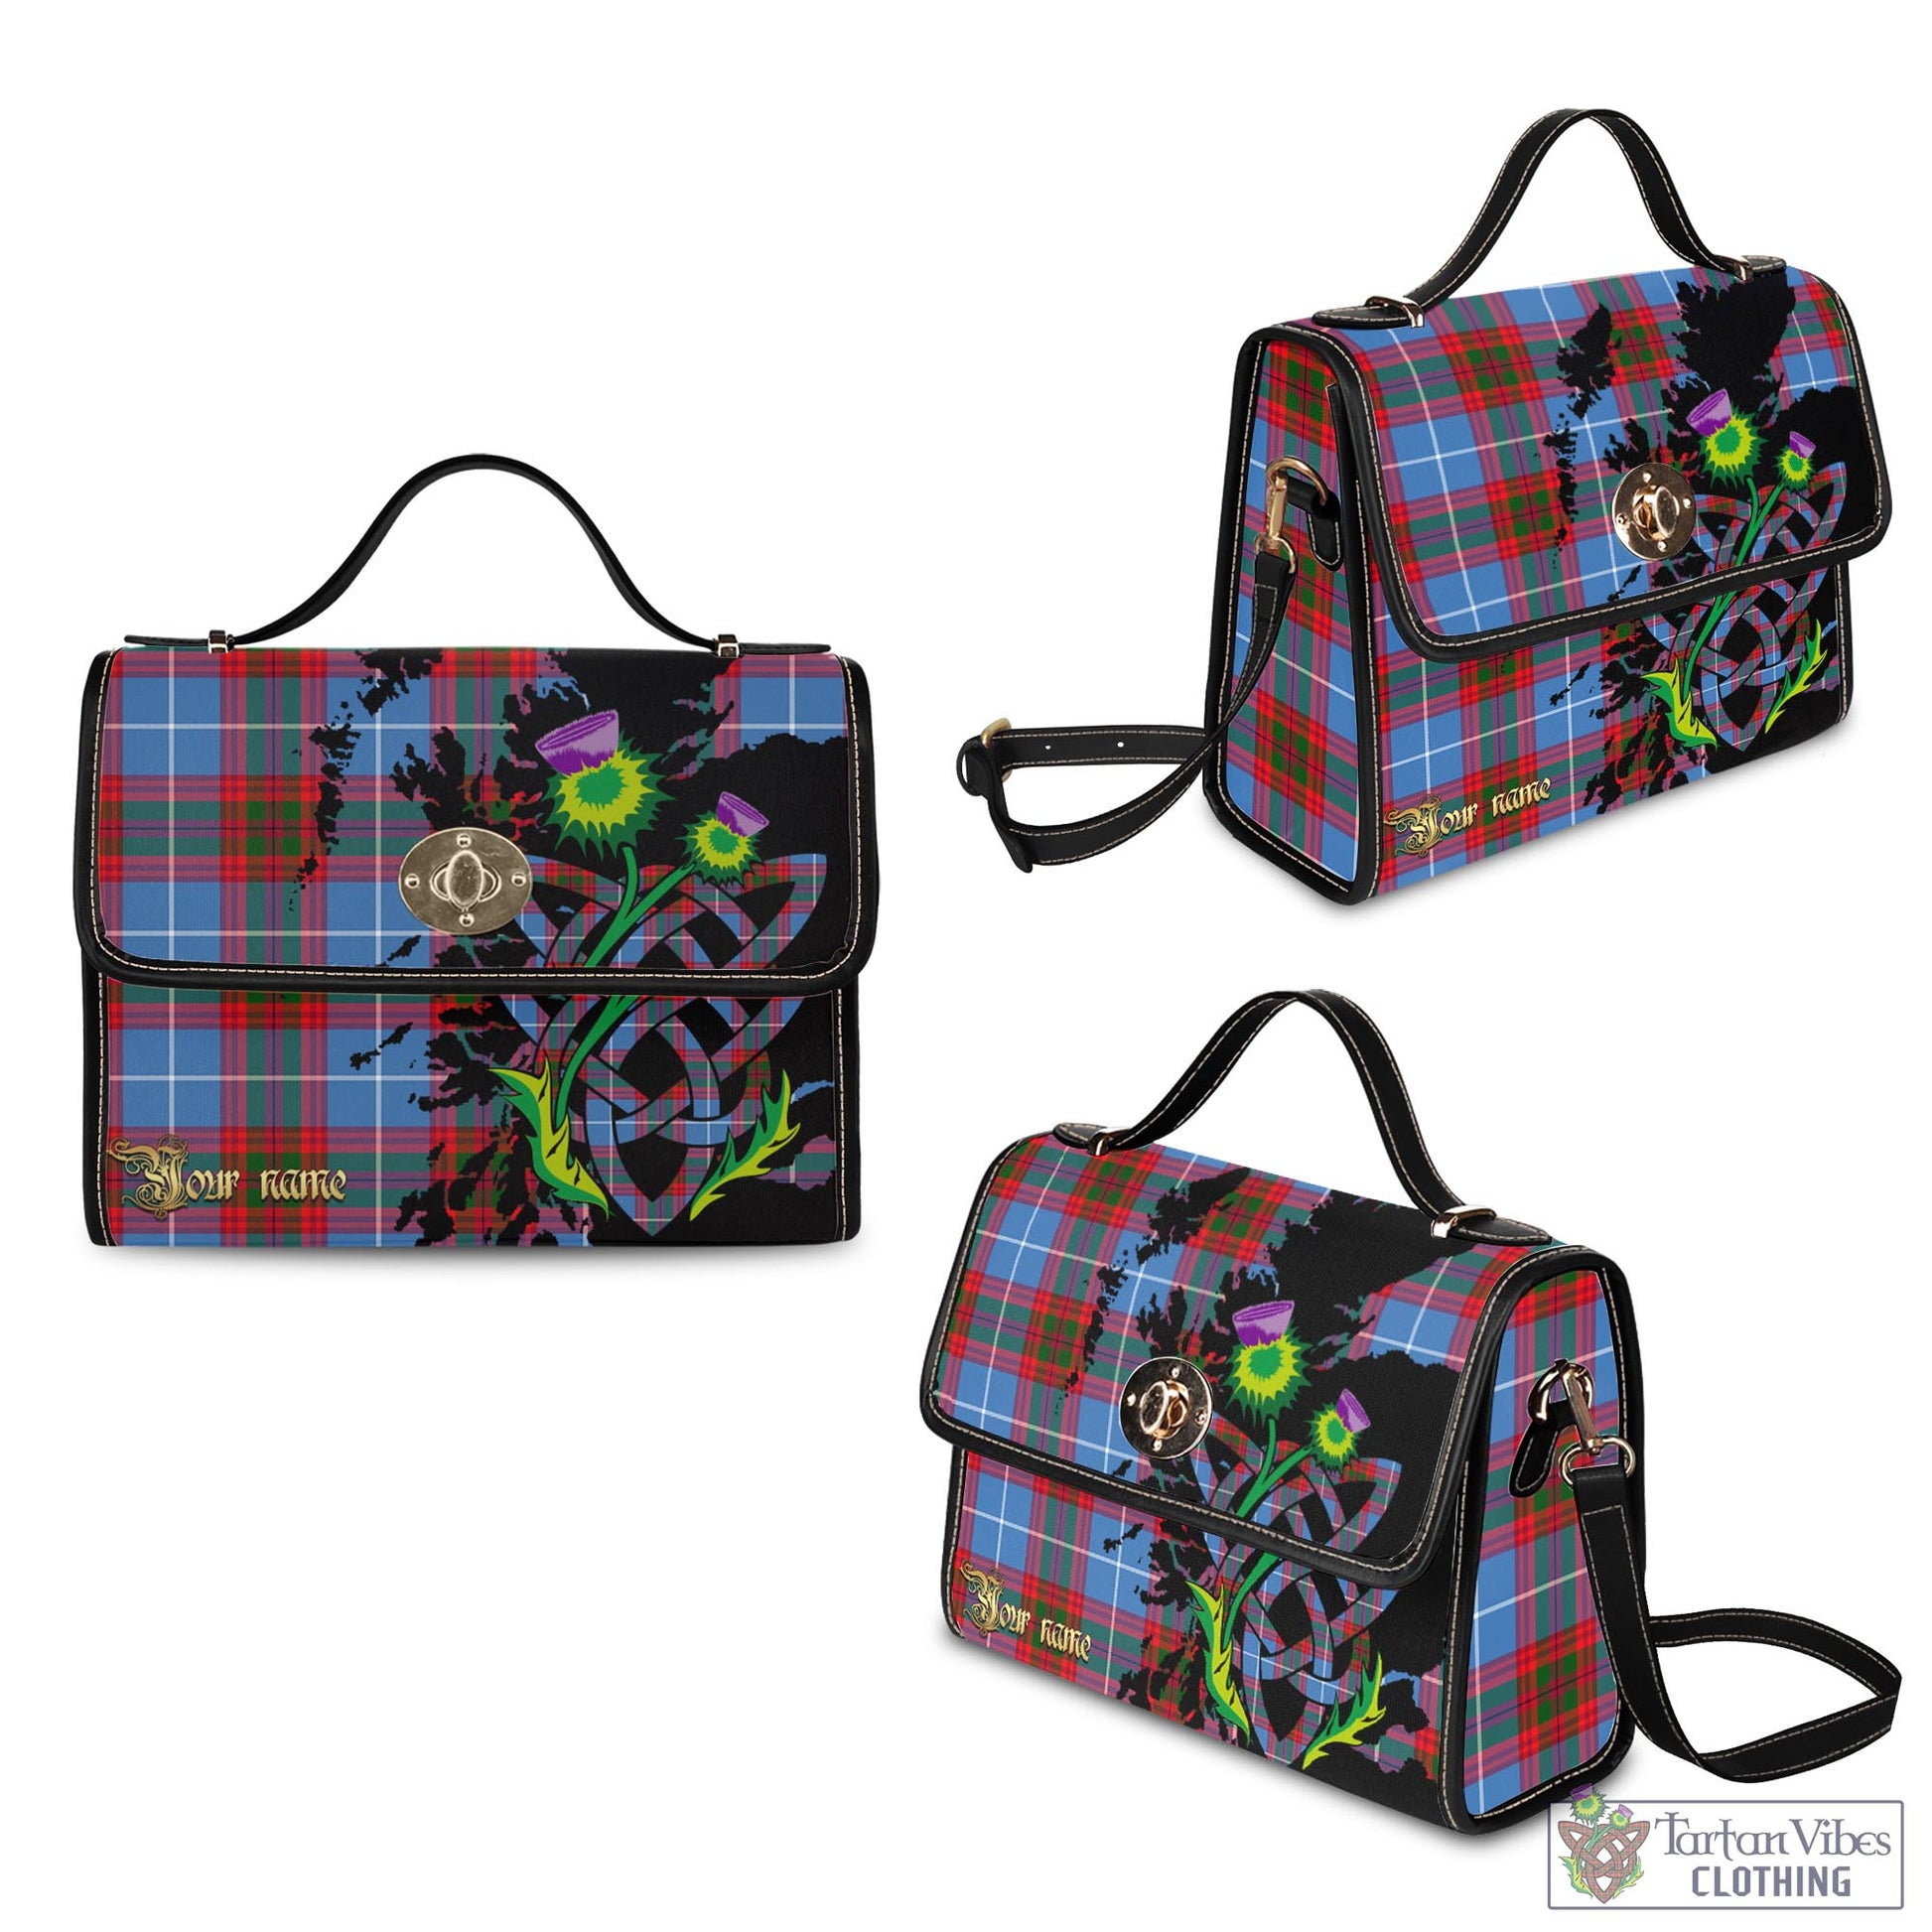 Tartan Vibes Clothing Trotter Tartan Waterproof Canvas Bag with Scotland Map and Thistle Celtic Accents